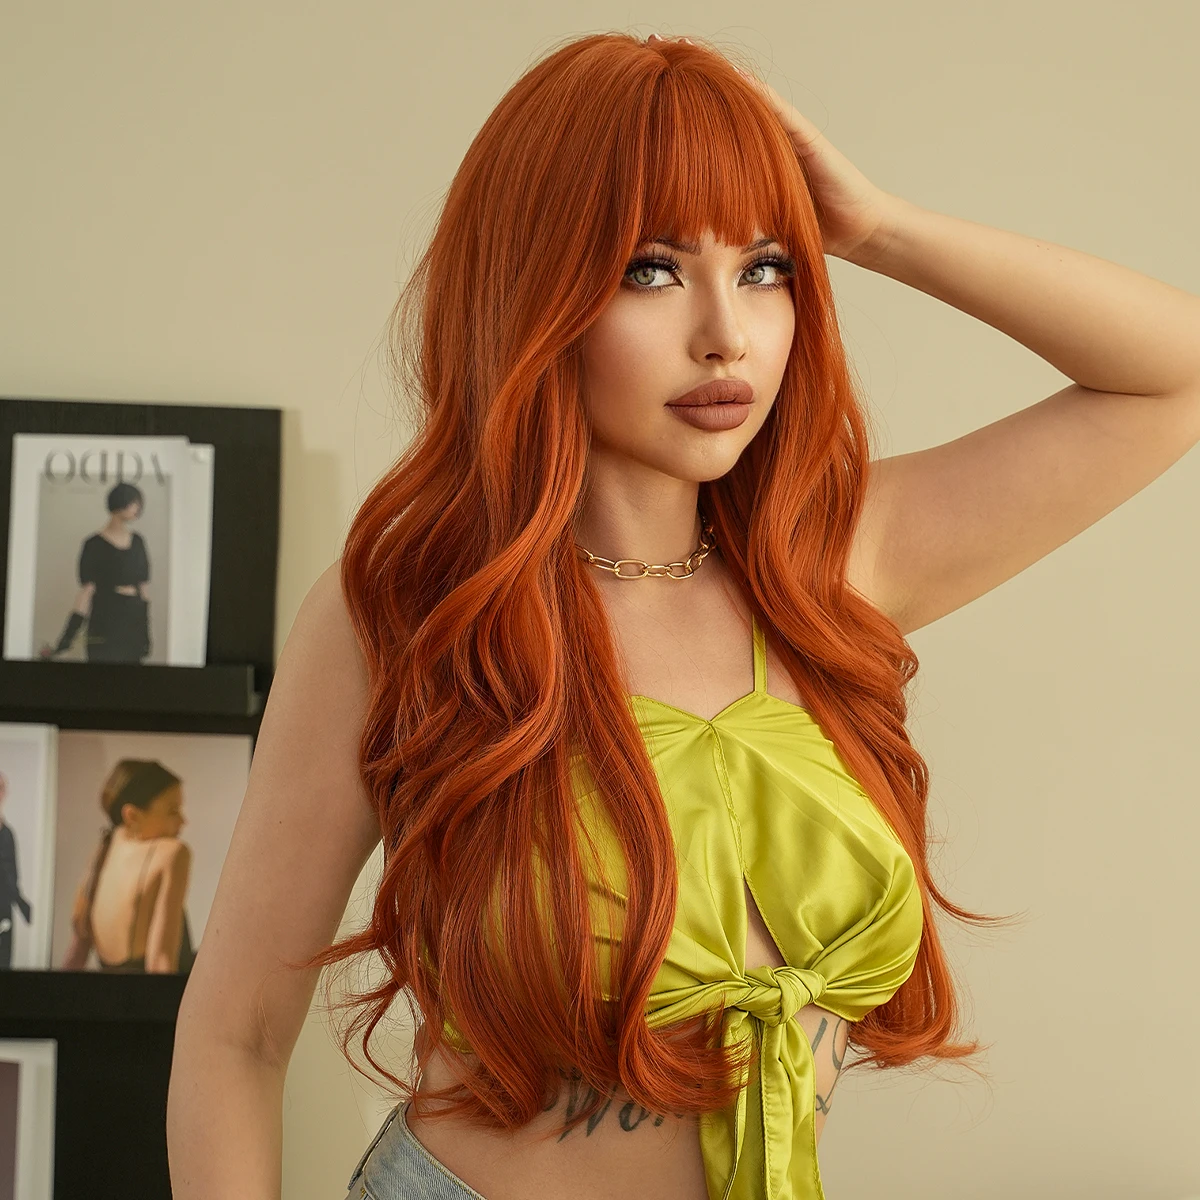 7JHH WIGS Costume Wigs Long Body Curly Orange Wigs with Neat Bangs High Density Heat Resistant Synthetic Hair Wig for Women